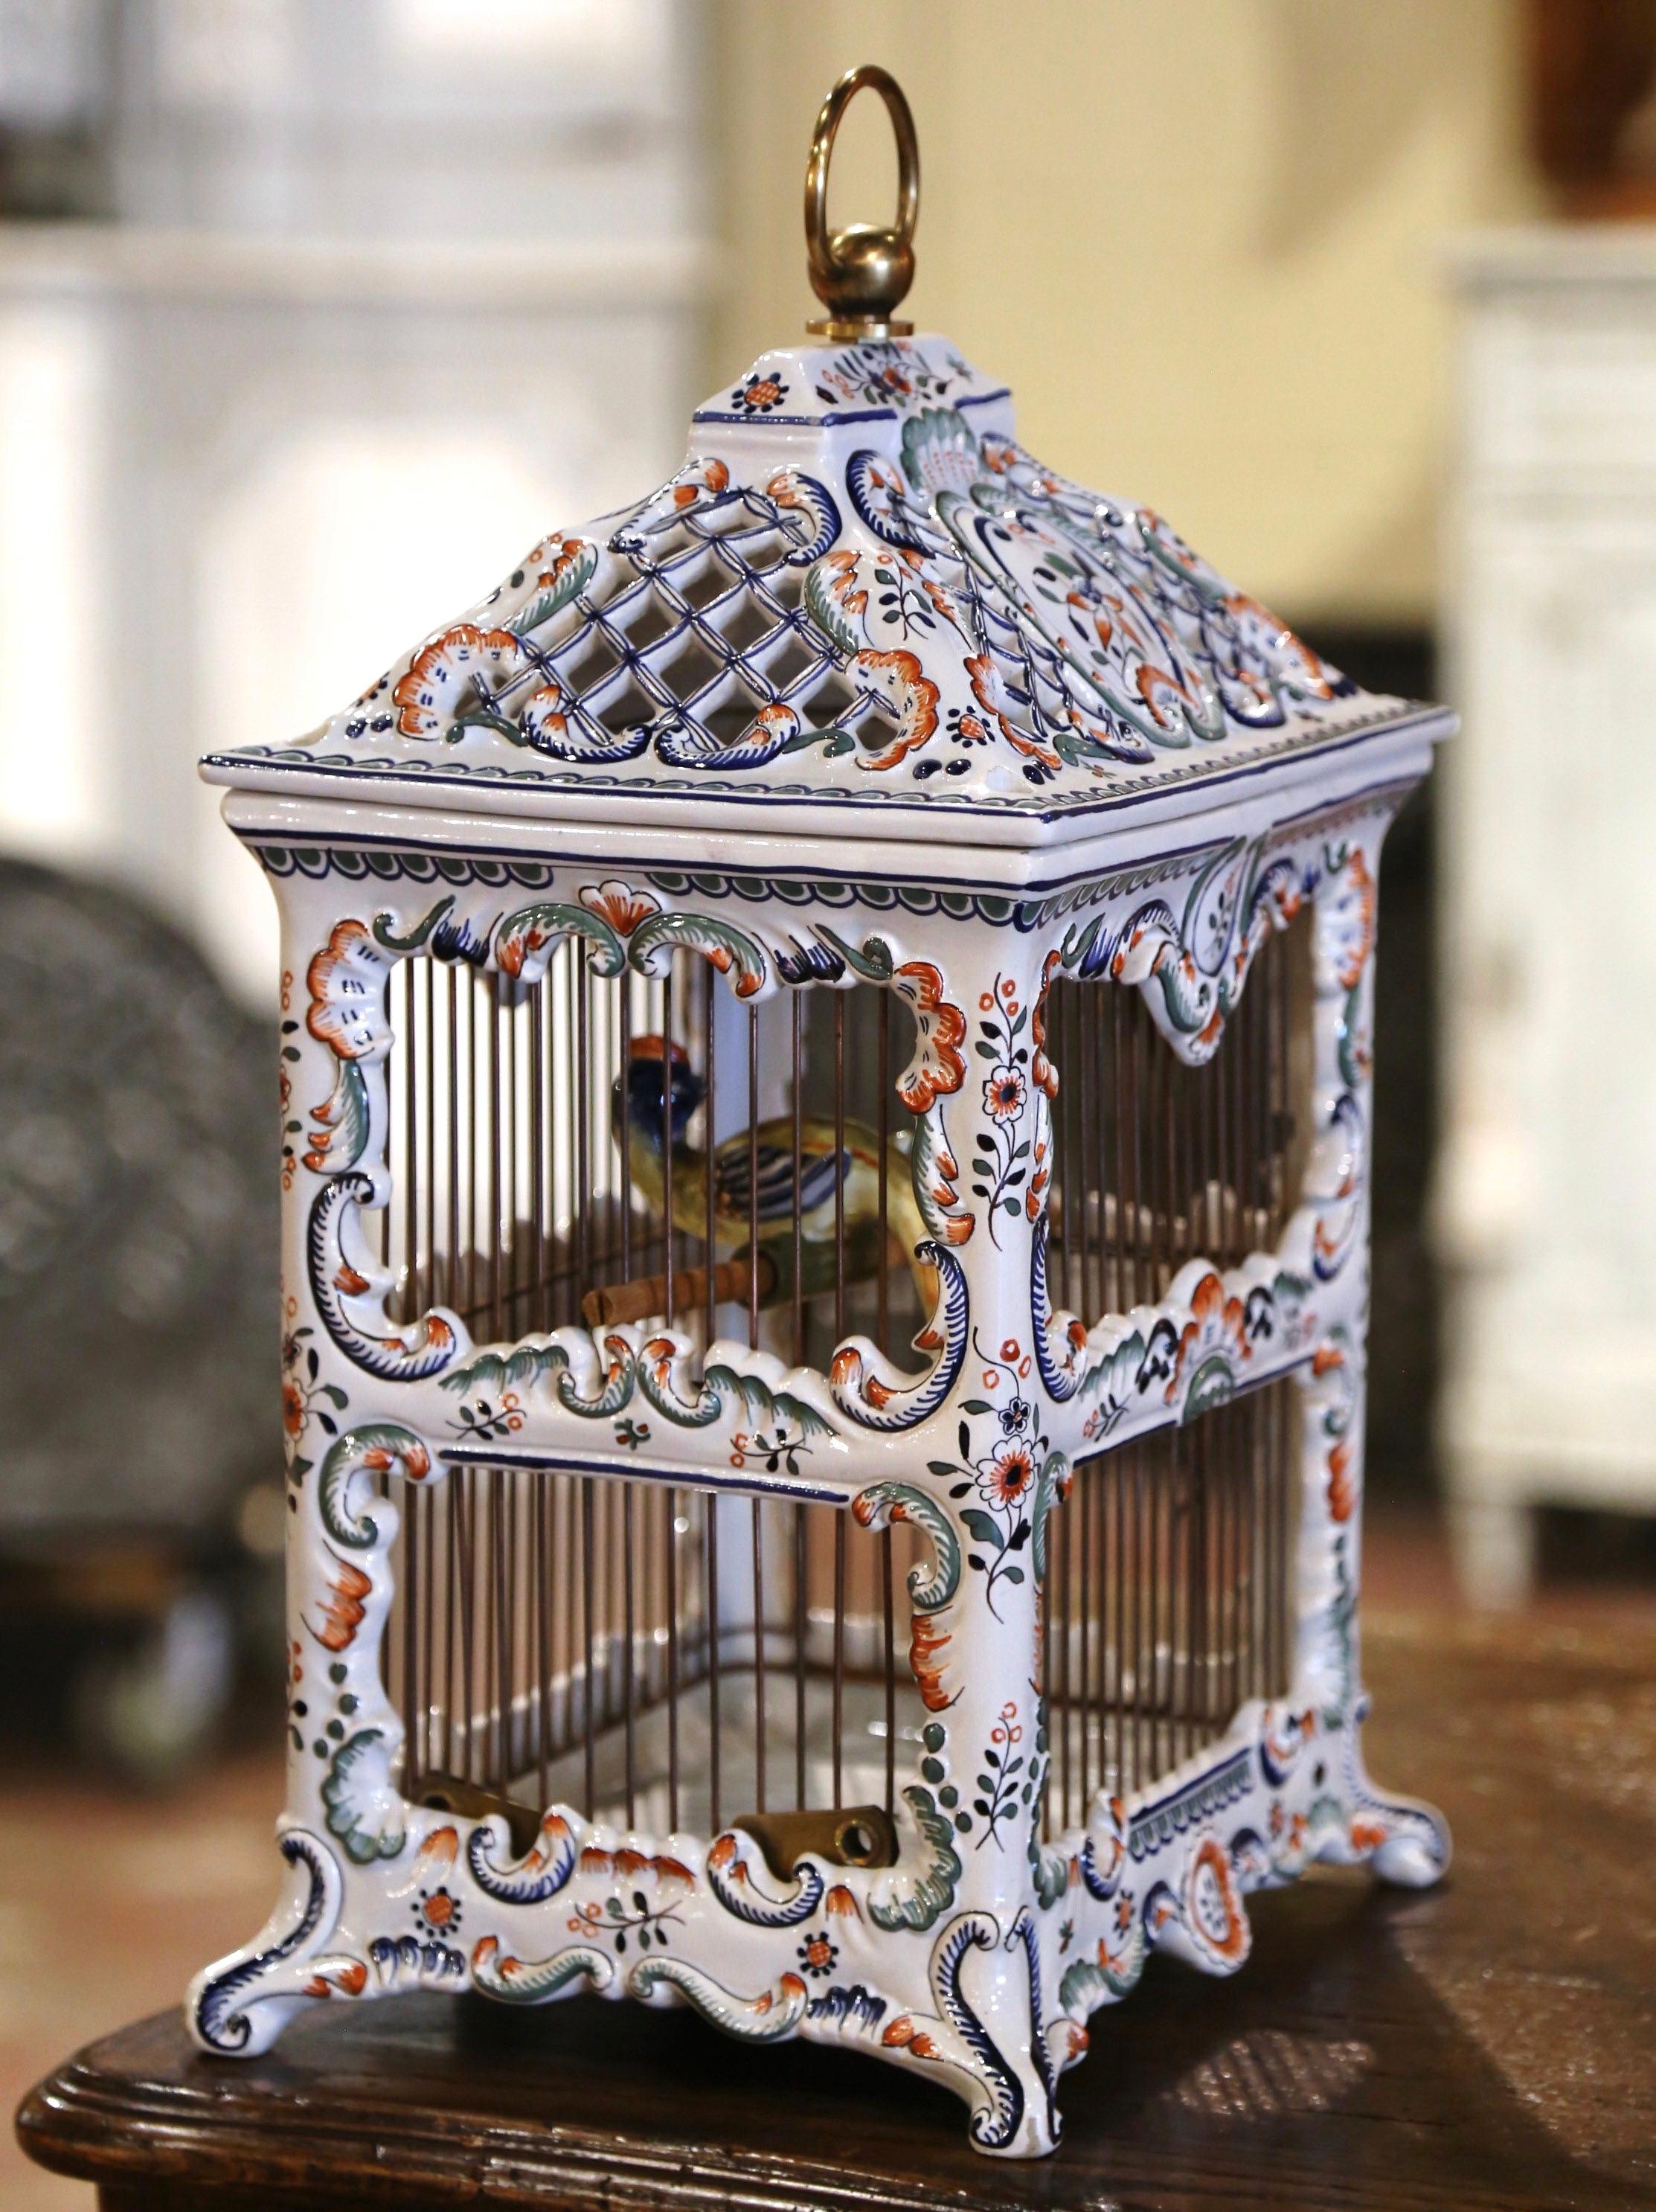 20th Century Midcentury French Decorative Hand Painted Porcelain Birdcage from Normandy